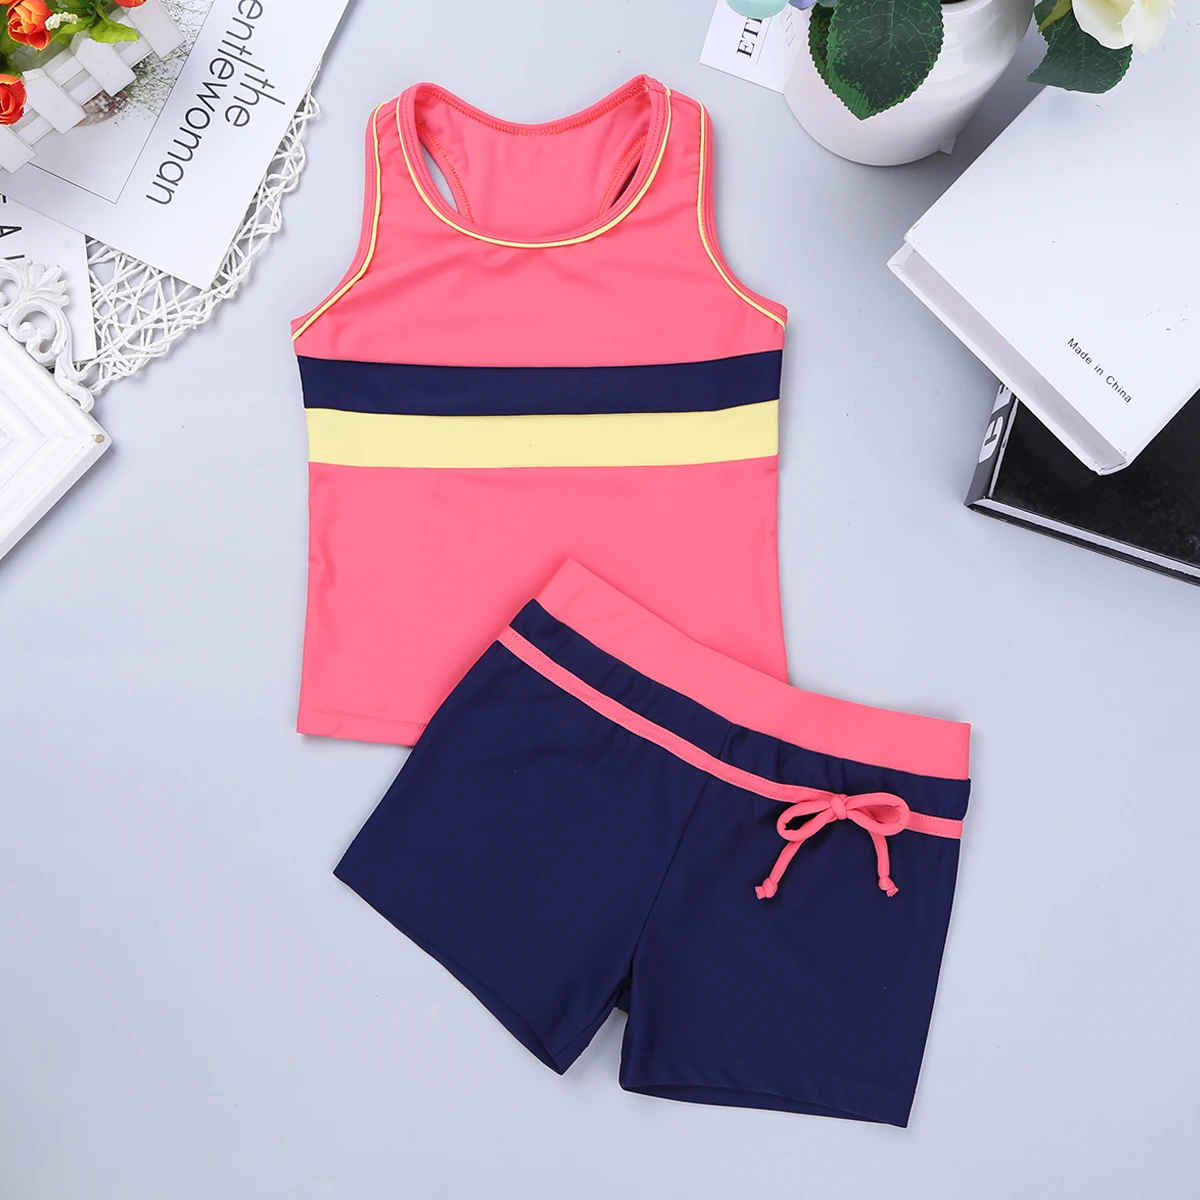 

Girls Tankini Swimsuit Two Pieces Swimming Suit Kids Swimwear Sleeveless Round Neckline Swimsuit Tops with Bottoms Bathing Suit